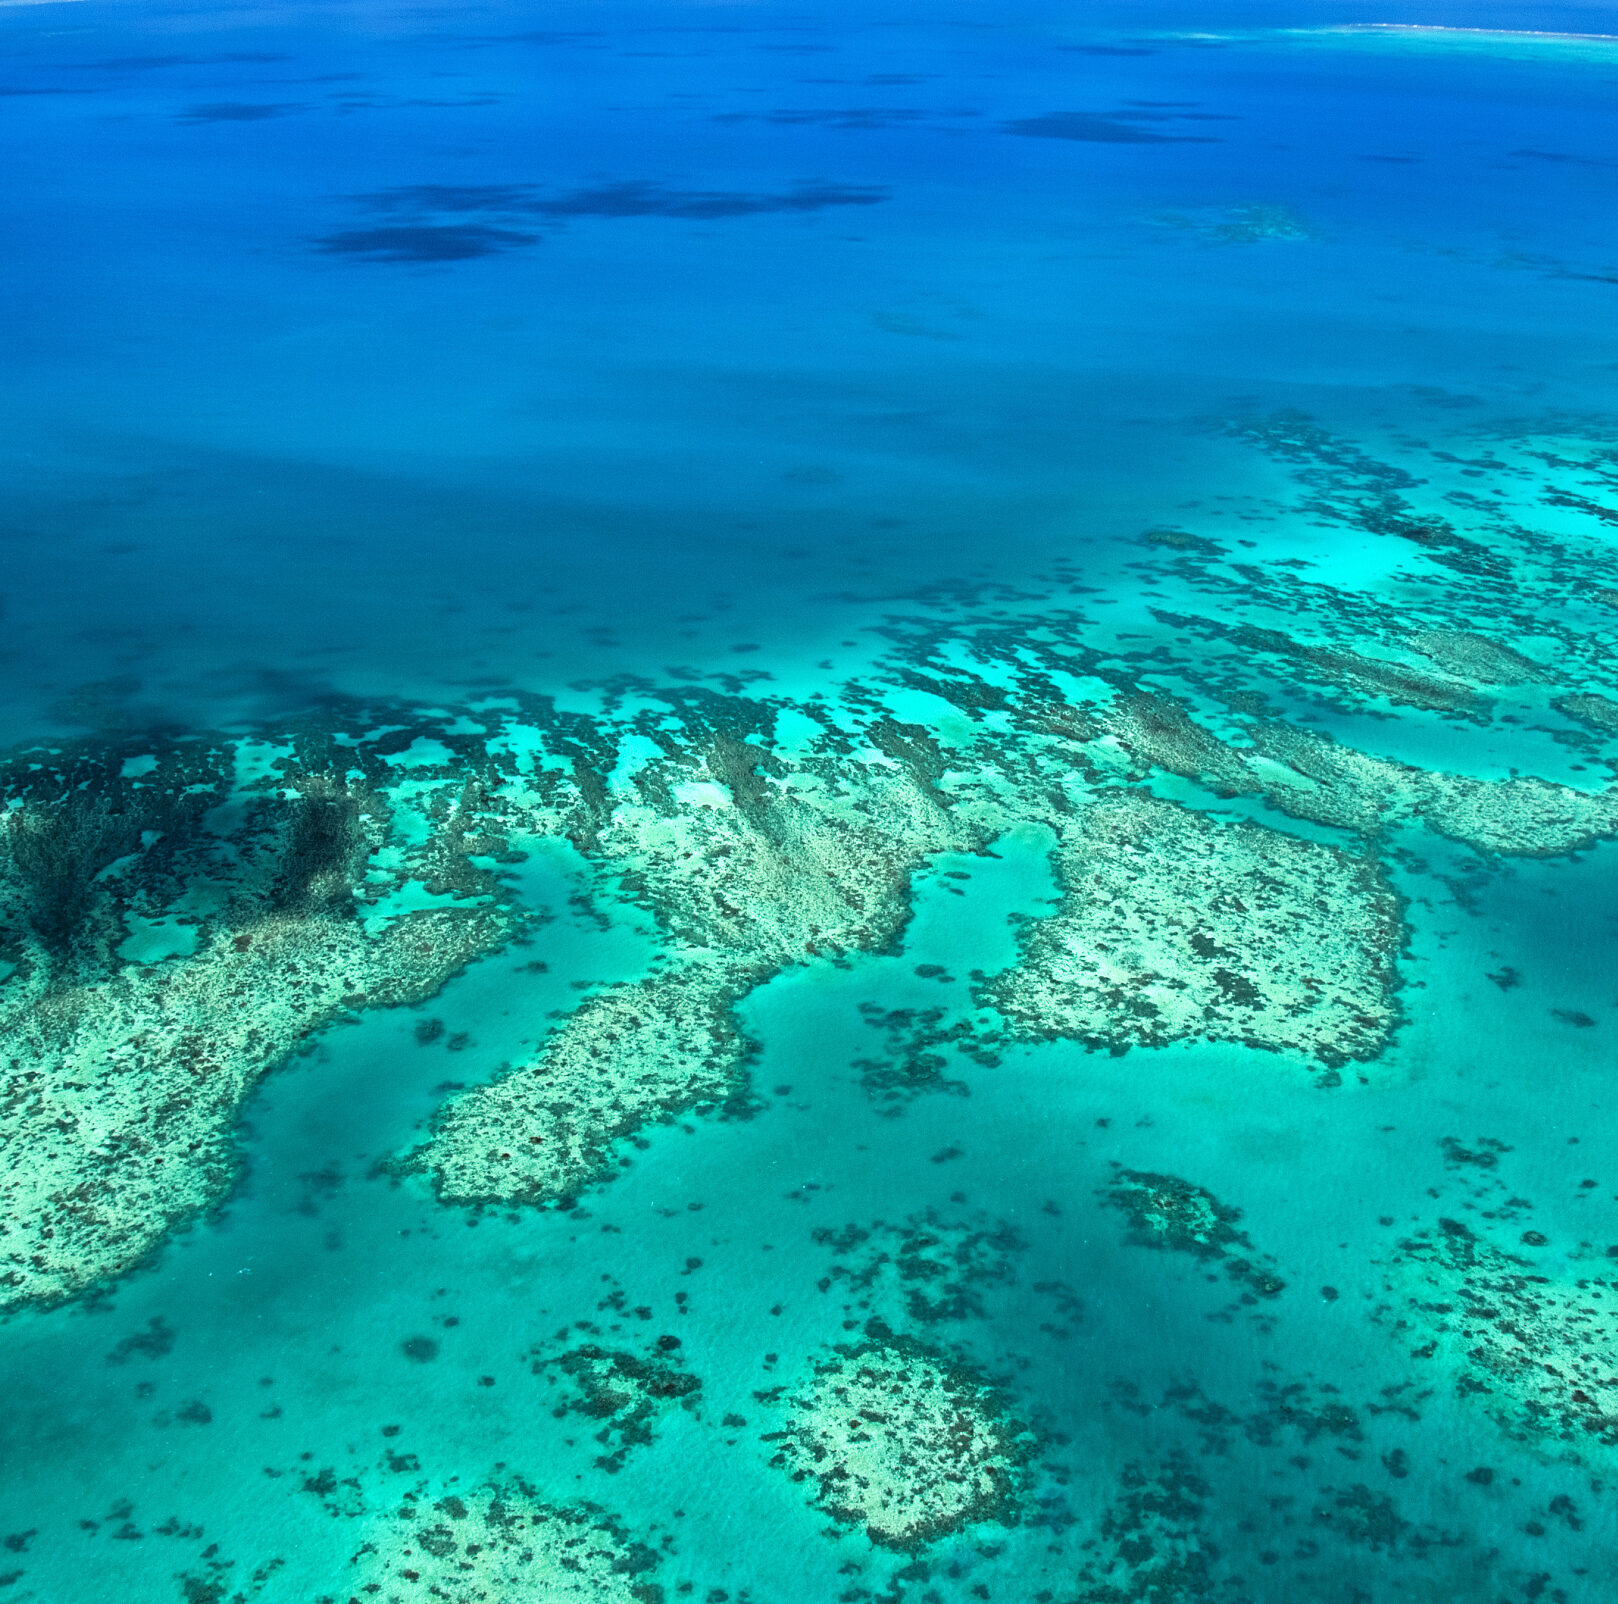 Aerial view of a great barrier reef